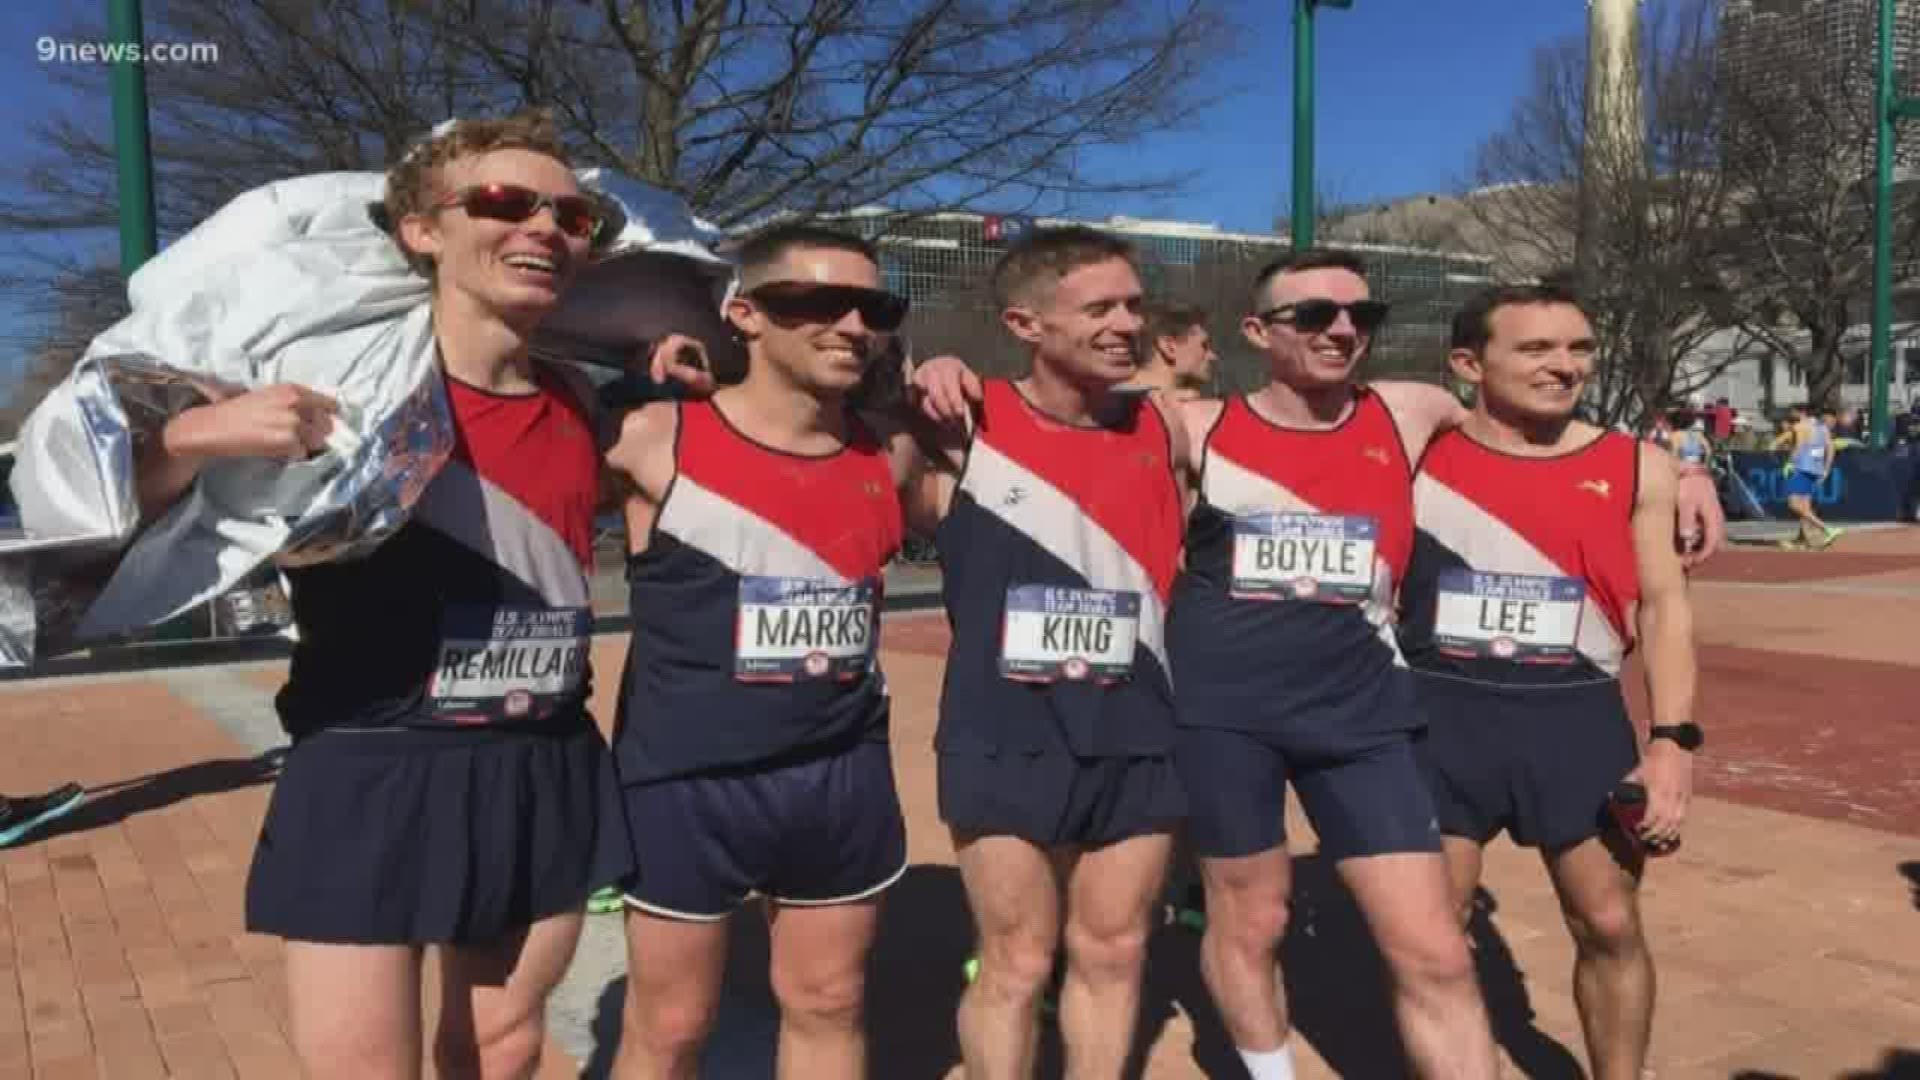 The five 'Good Boys' from Denver might not be going to the Olympics, but they raced their hearts out alongside the fastest marathoners in the country.